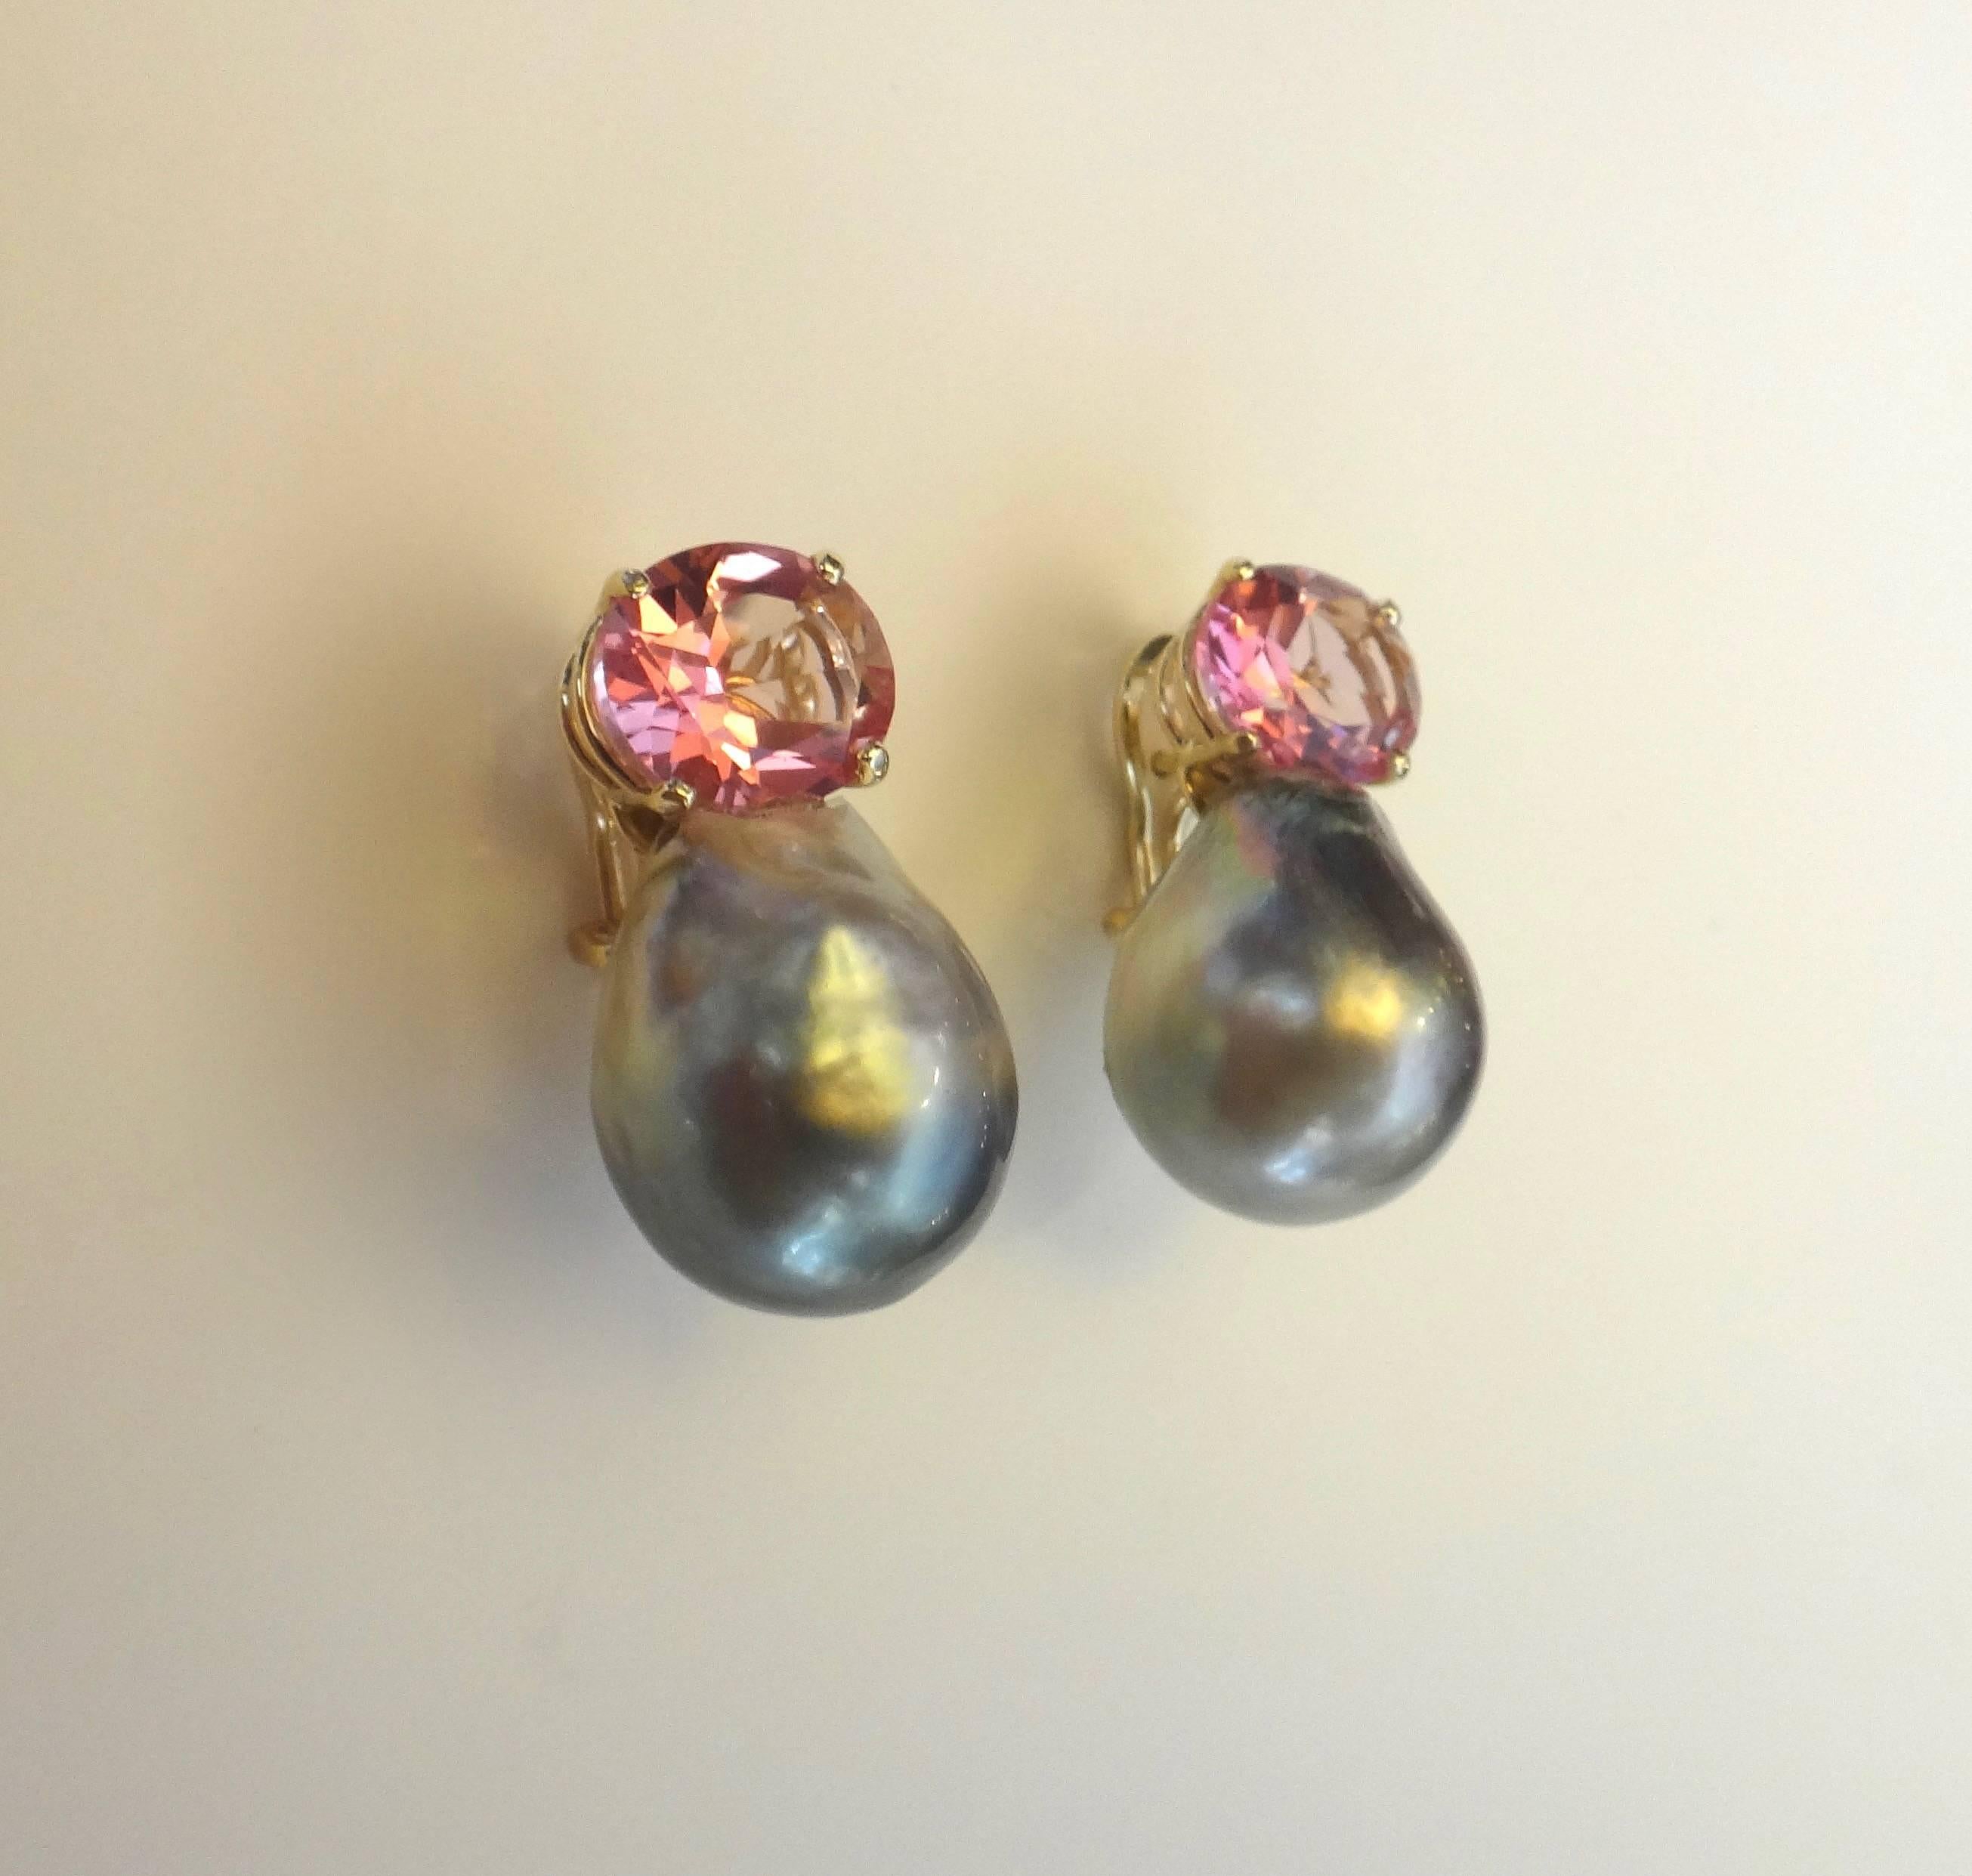 A perfectly matched and delicately colored pair of baby pink topaz are combined with an enormous pair of modeled gray baroque Tahitian pearls in these exciting earrings.  Simply set in hand fabricated settings, the earrings have posts with omega